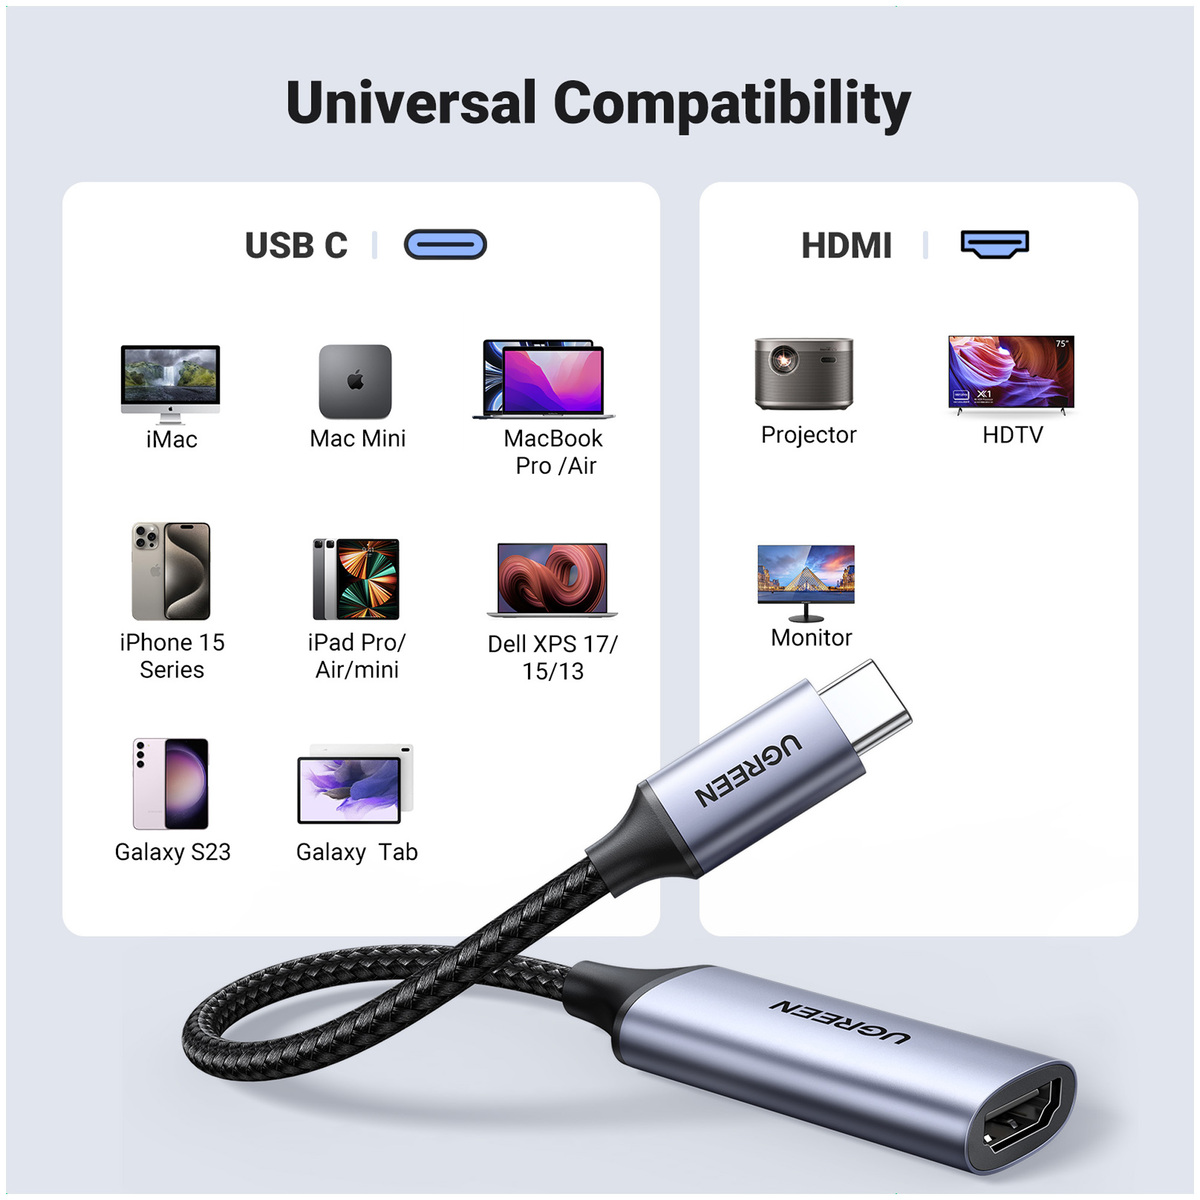 Ugreen USB-C to HDMI Adapter, 70444